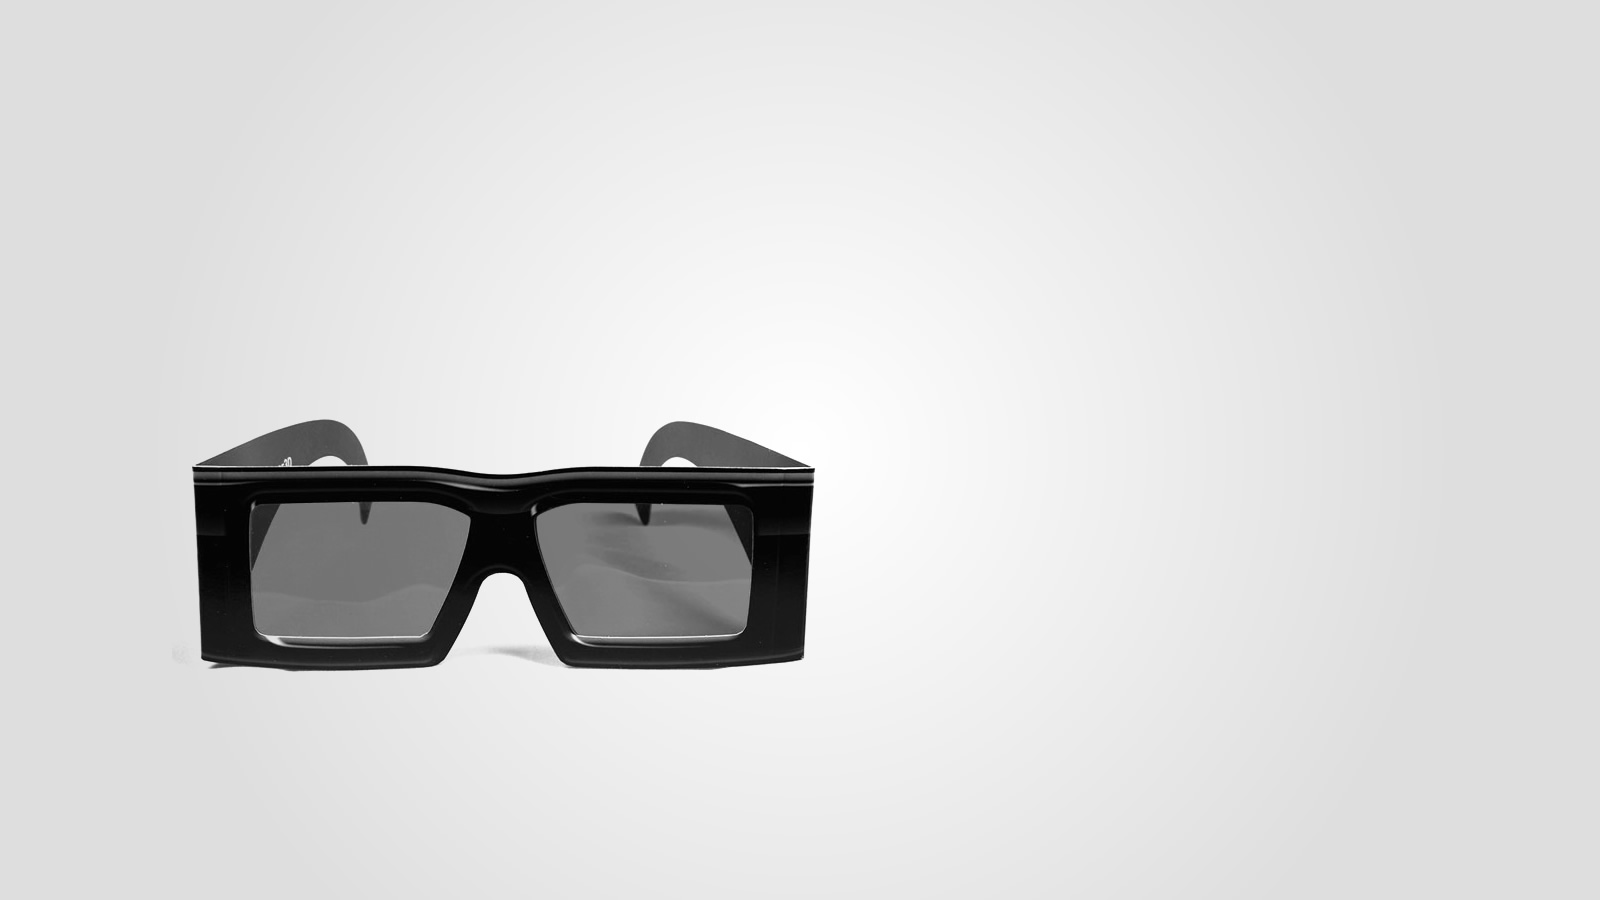 A pair of 3-D glasses